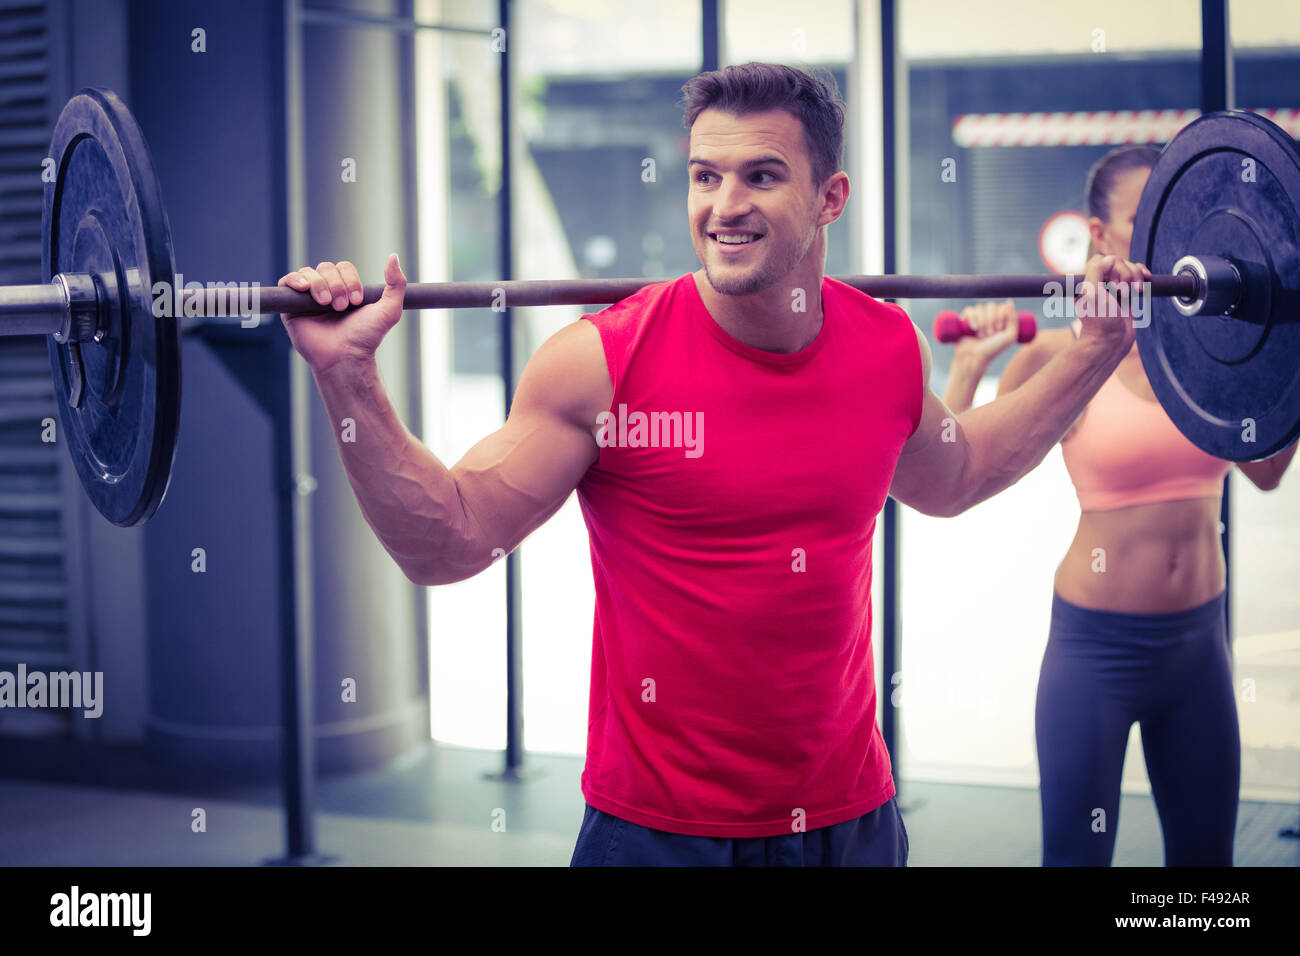 Two young Bodybuilders doing weightlifting Stock Photo